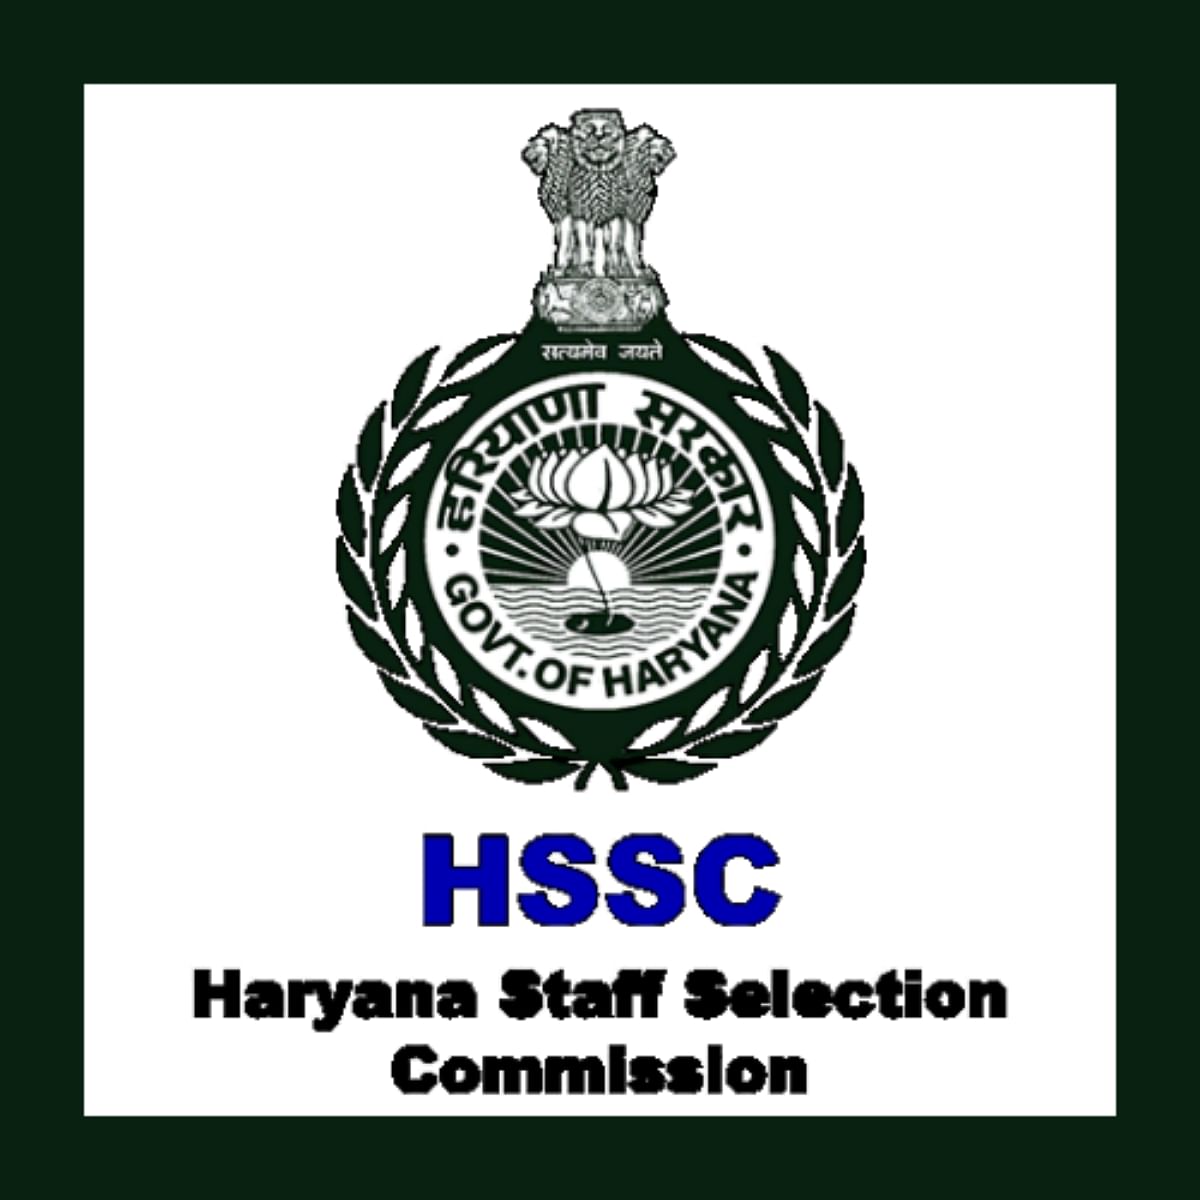 HSSC Constable Recruitment 2021: Applications Process Date Extended Upto February 25